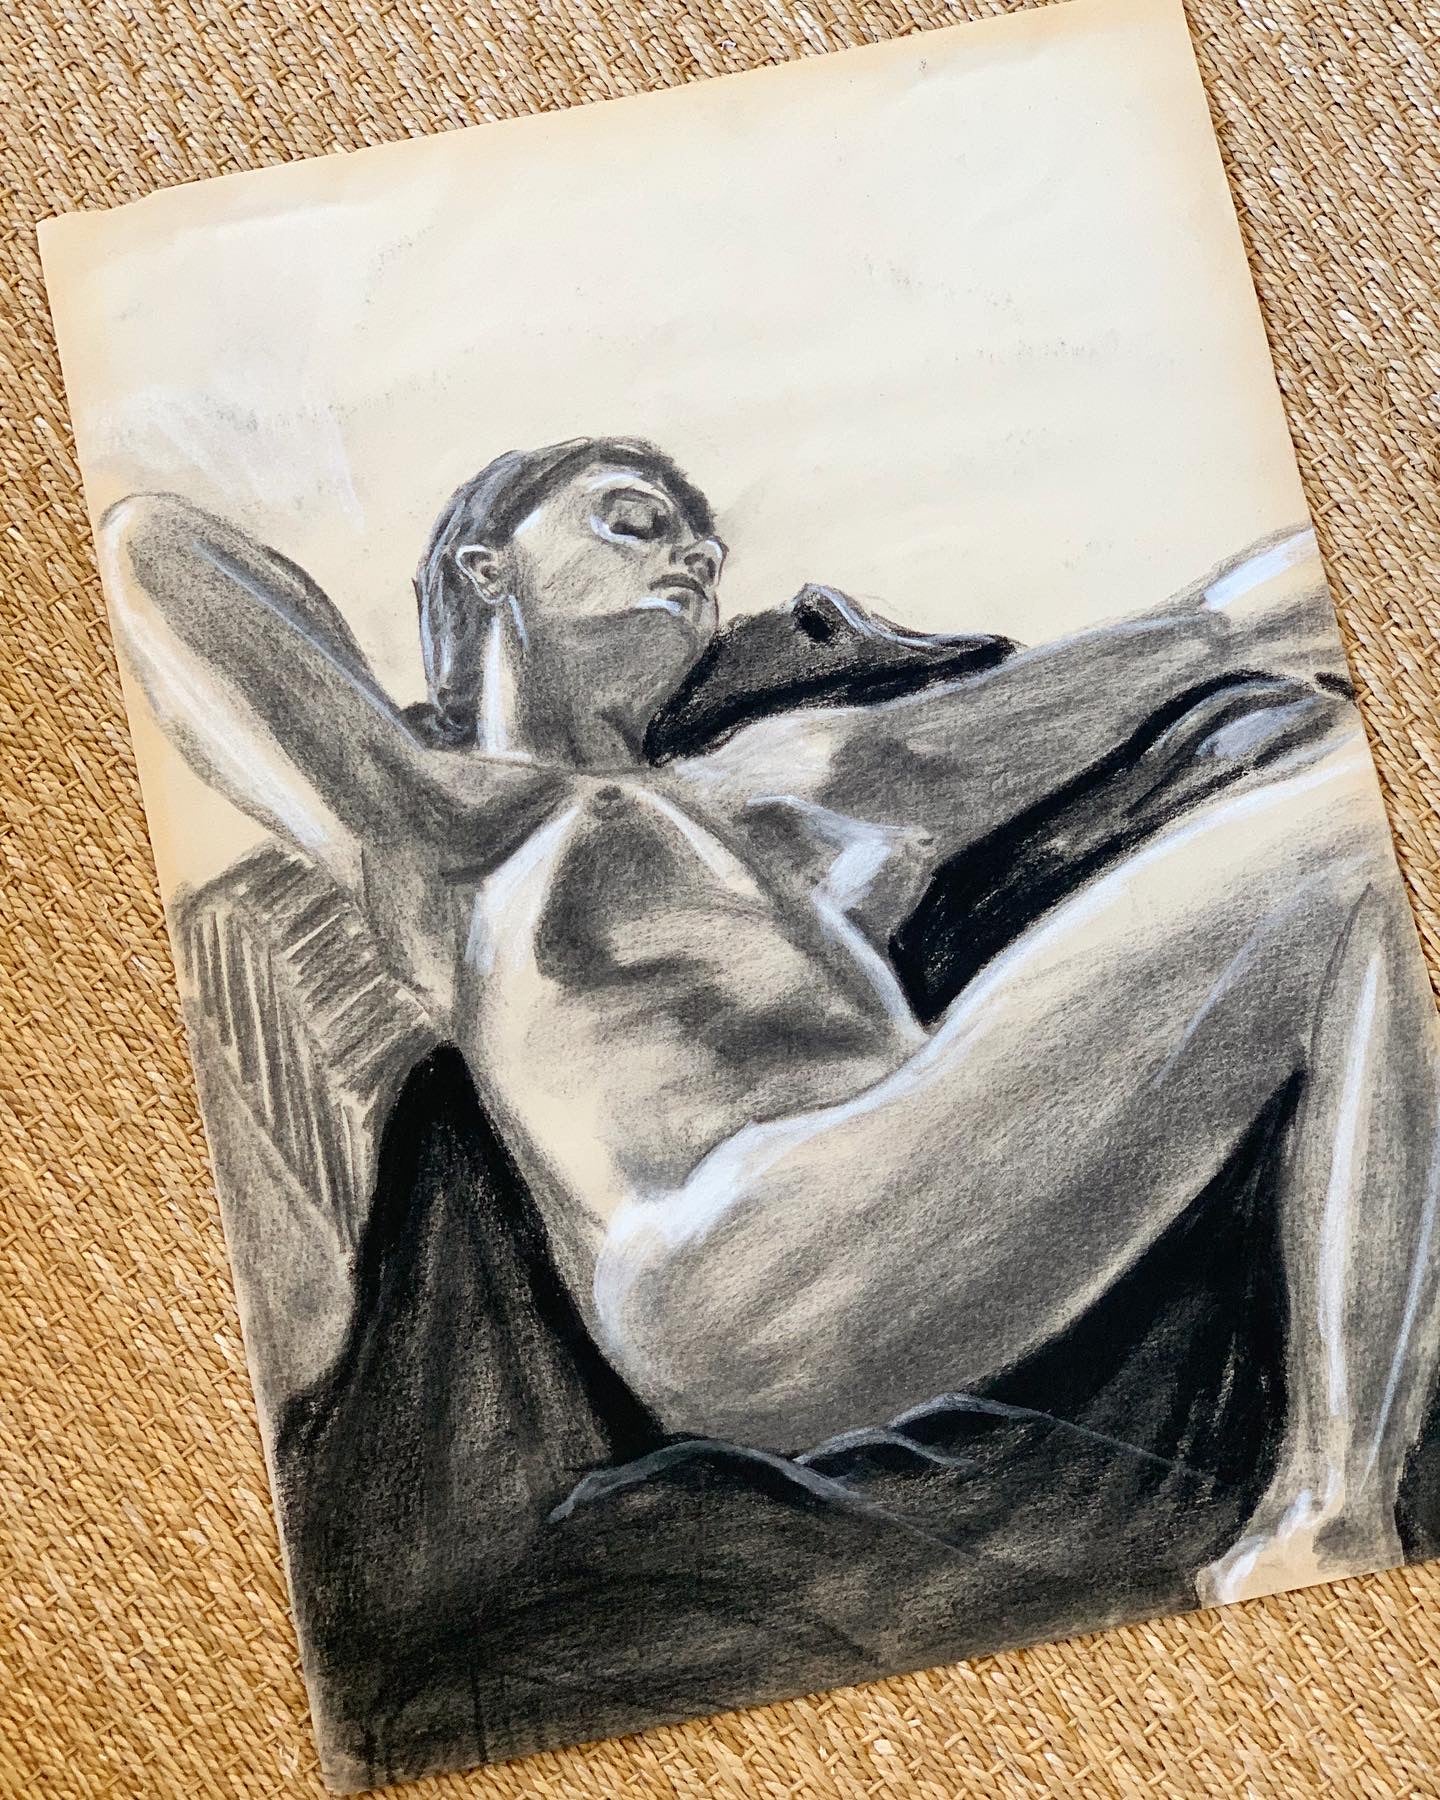 "Reclining Female Nude on Blanket #7” by Curtis